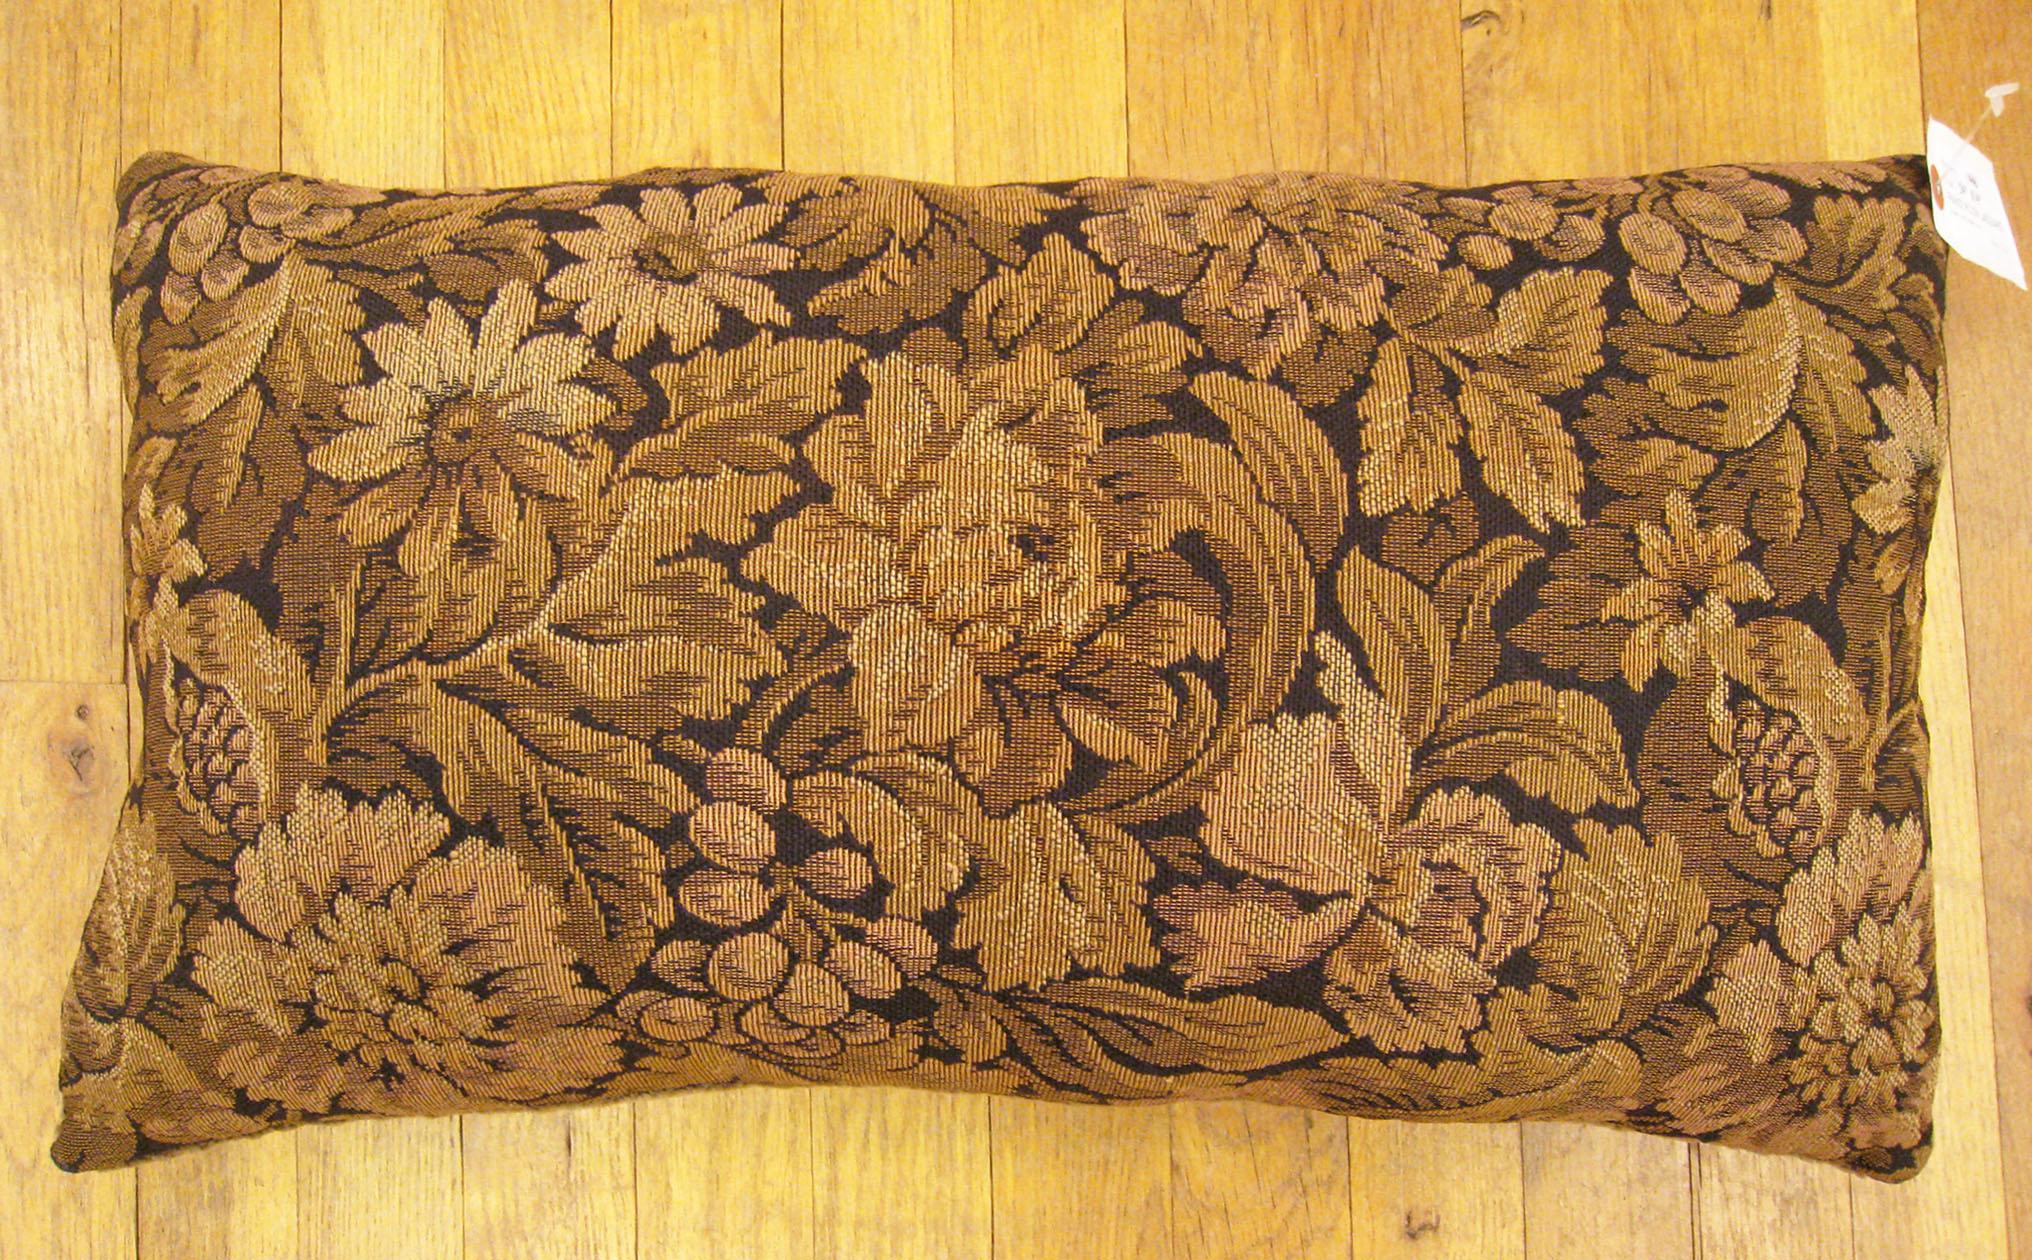 Antique French tapestry pillow; size 24” x 14” (2’ 0” x 1’ 2”). 

An antique decorative pillow with floral elments allover a brown central field, size 24” x 14” (2’ 0” x 1’ 2”). This lovely decorative pillow features an antique fabric on front